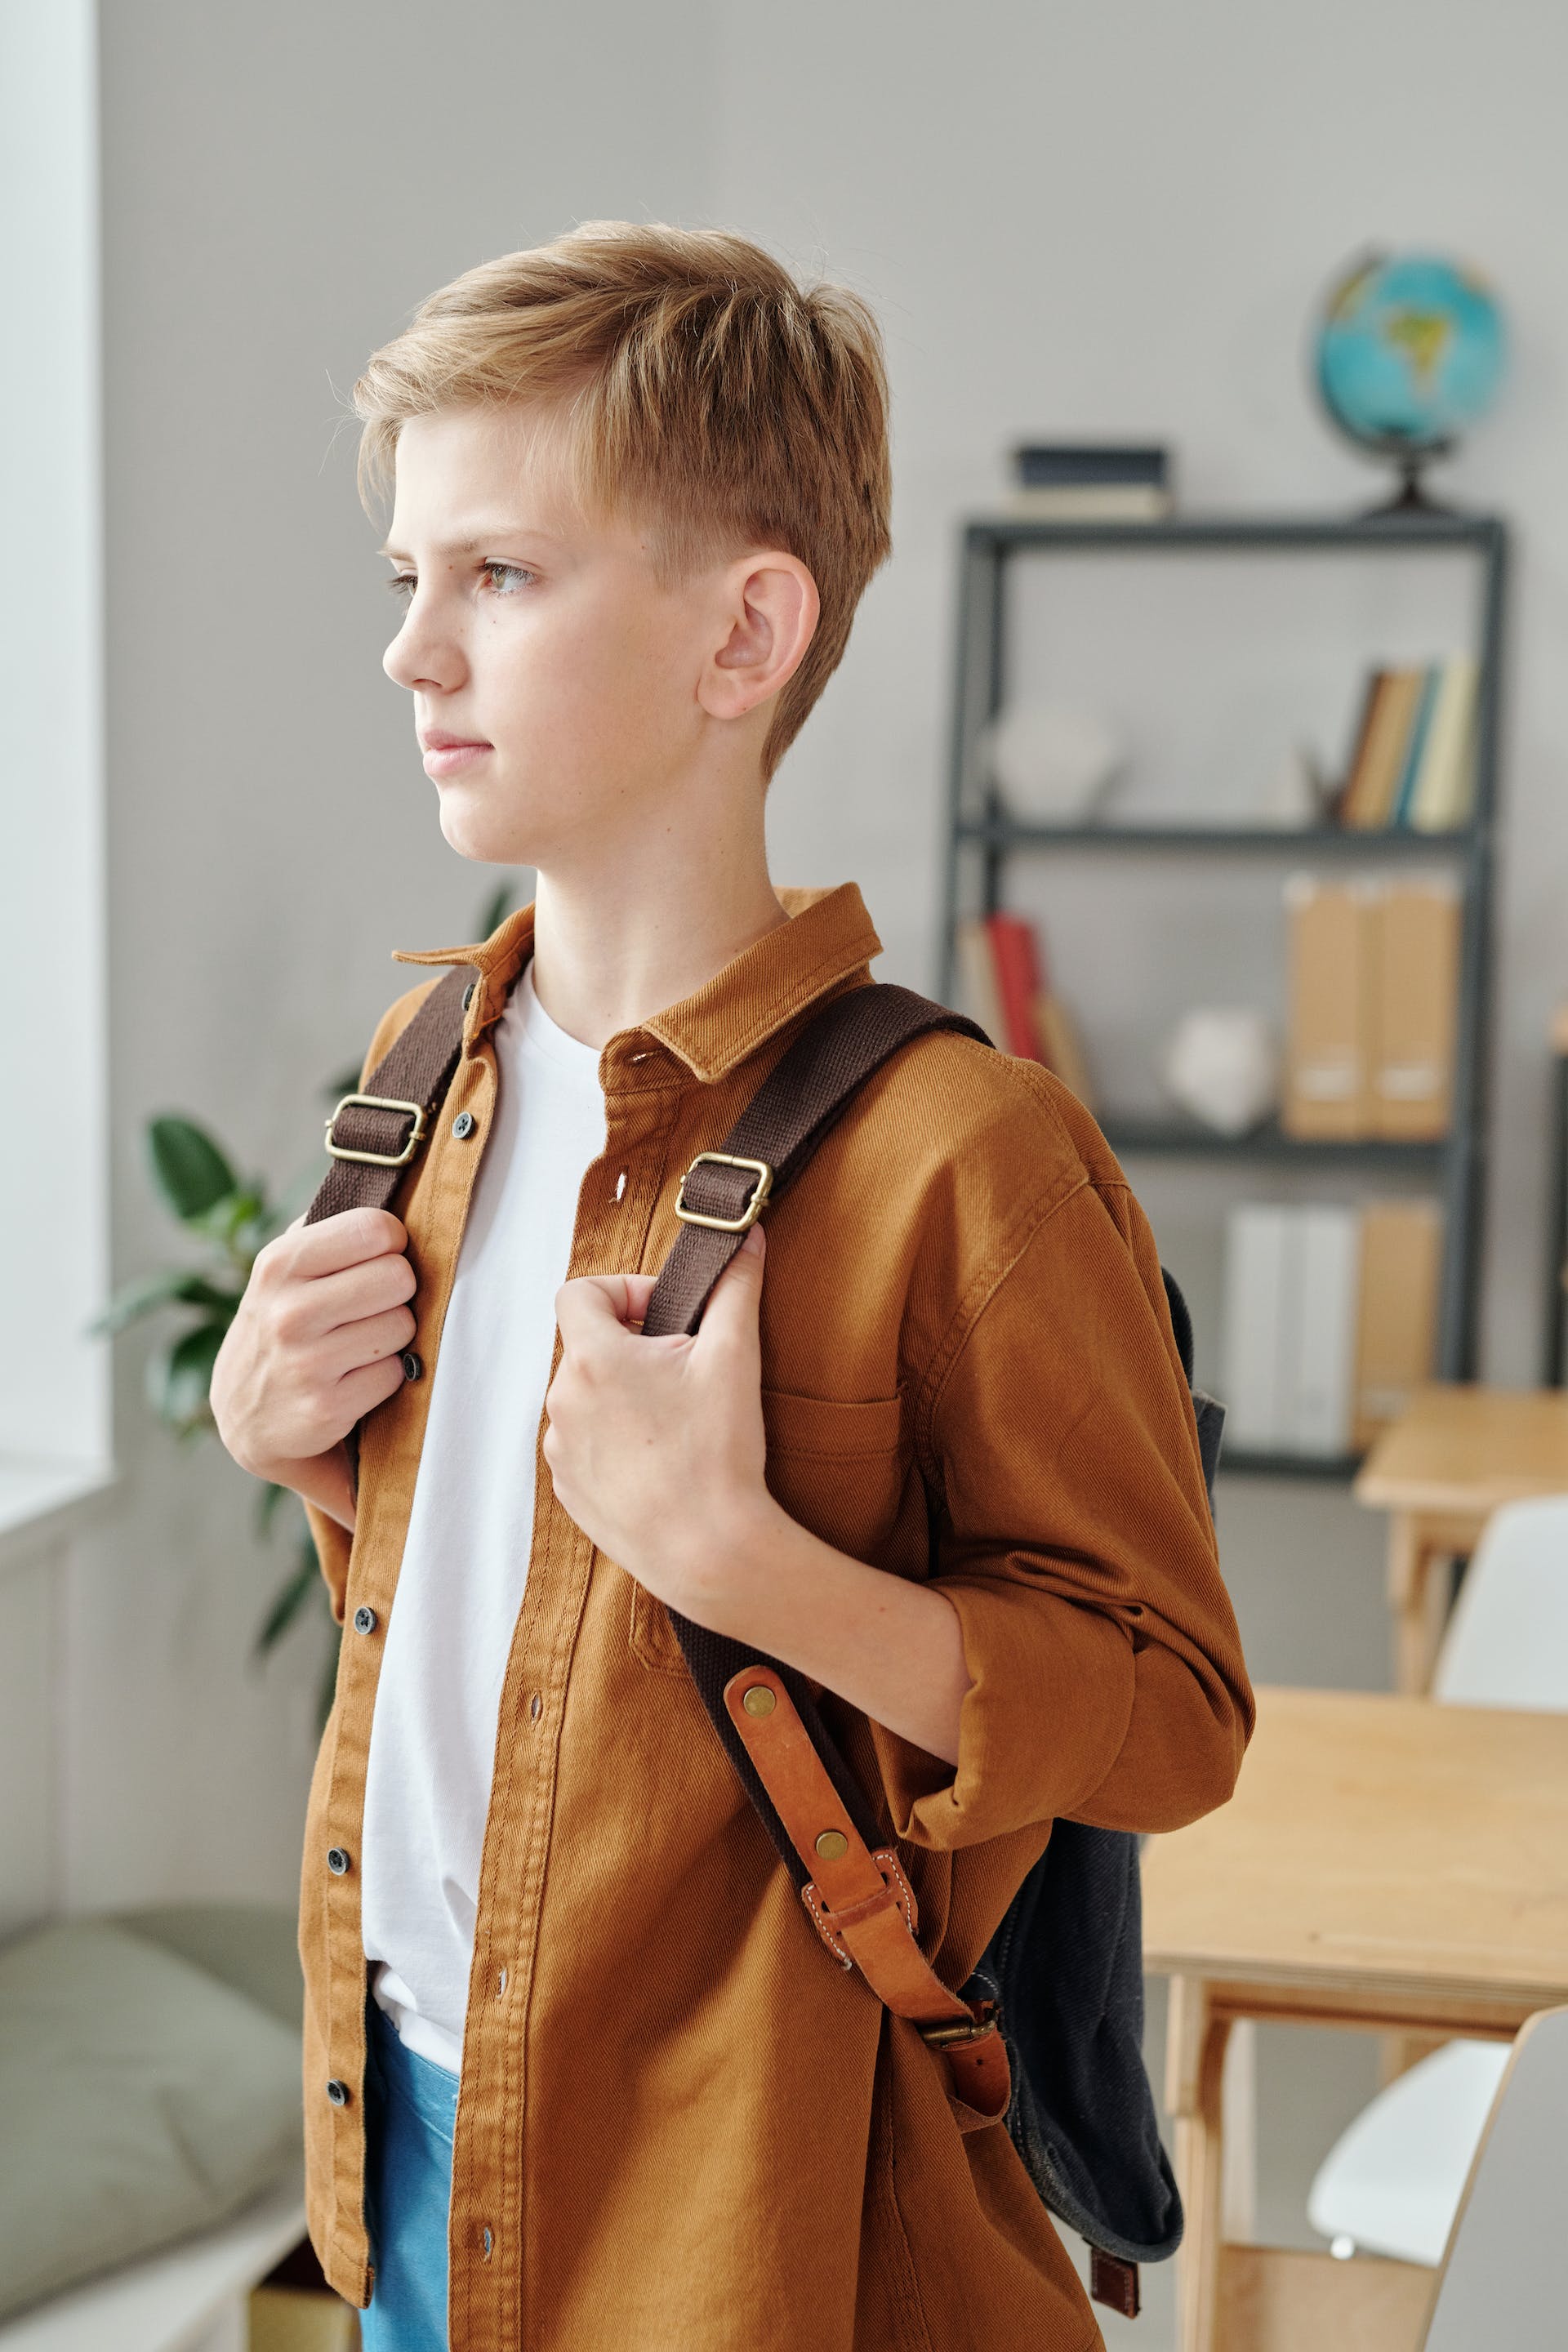 A sad young boy carrying a backpack | Source: Pexels